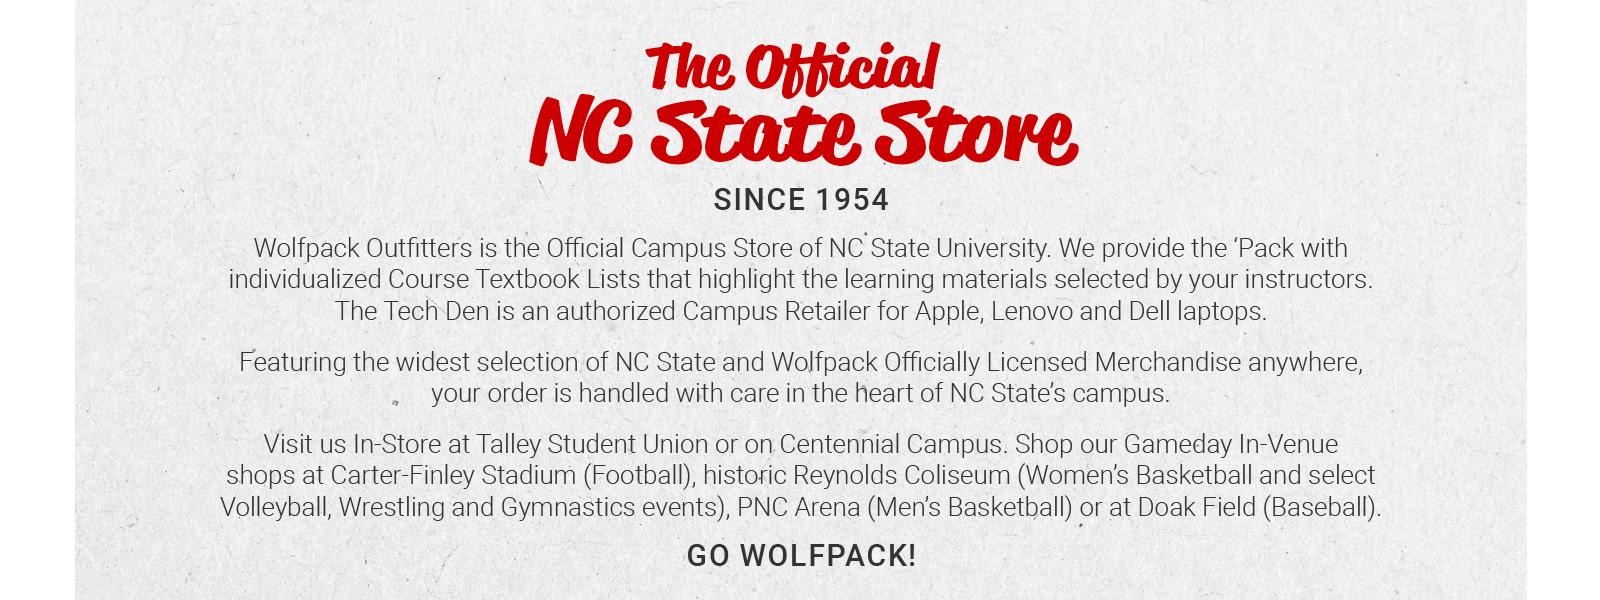 The Official NC State Store since 1954